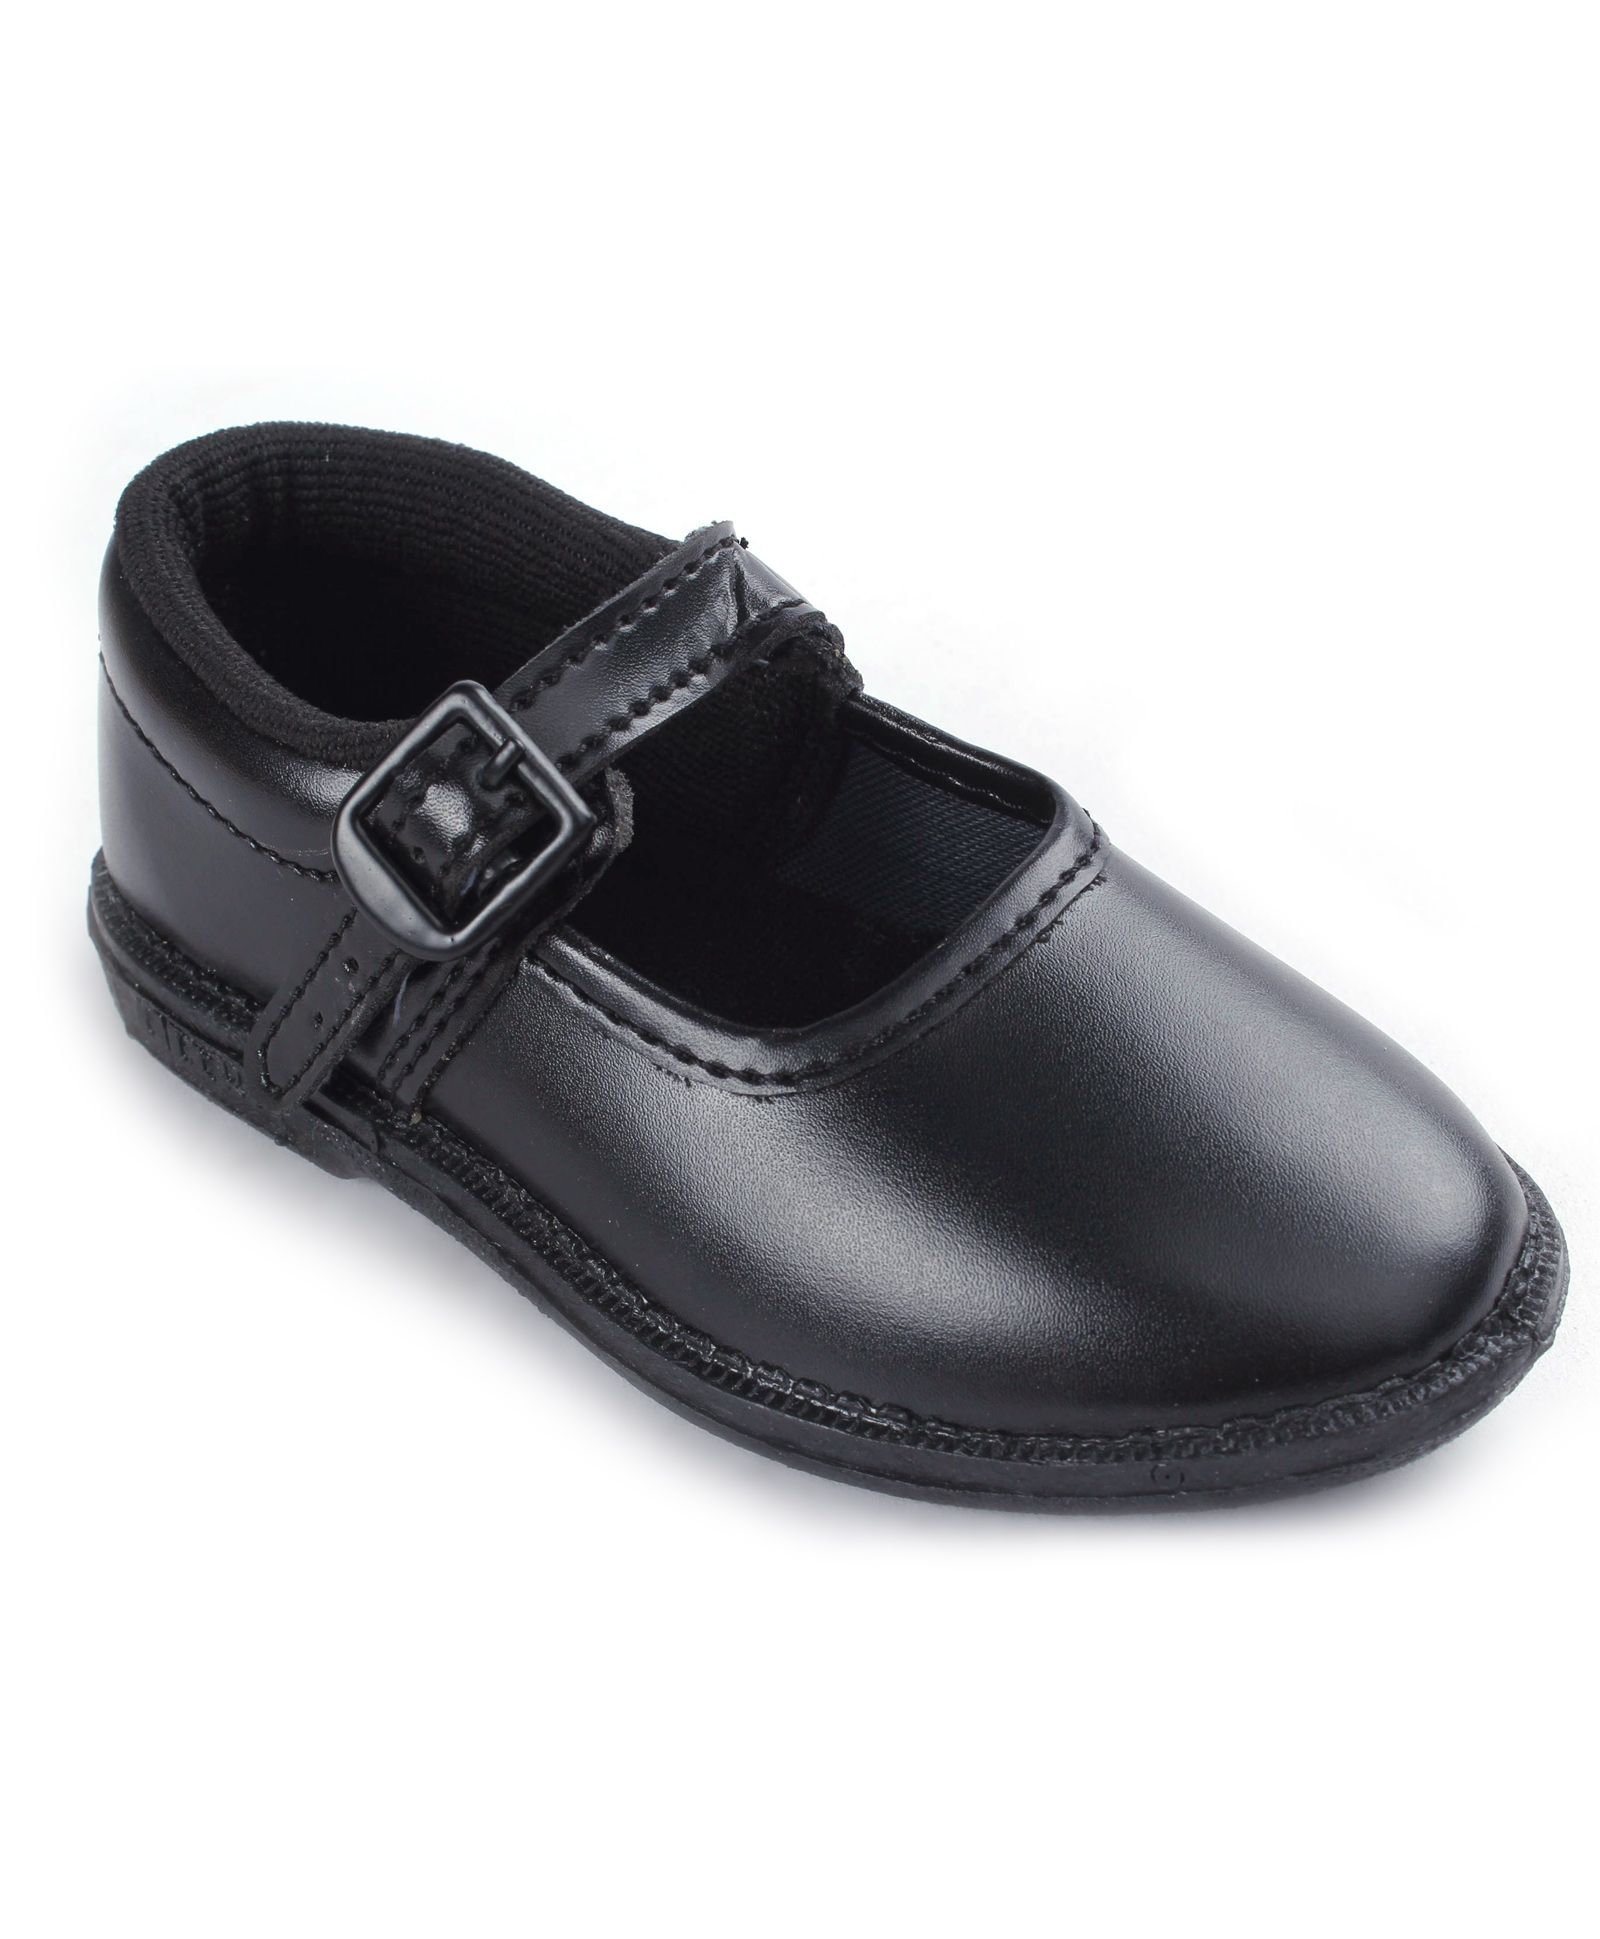 school shoes for girls price